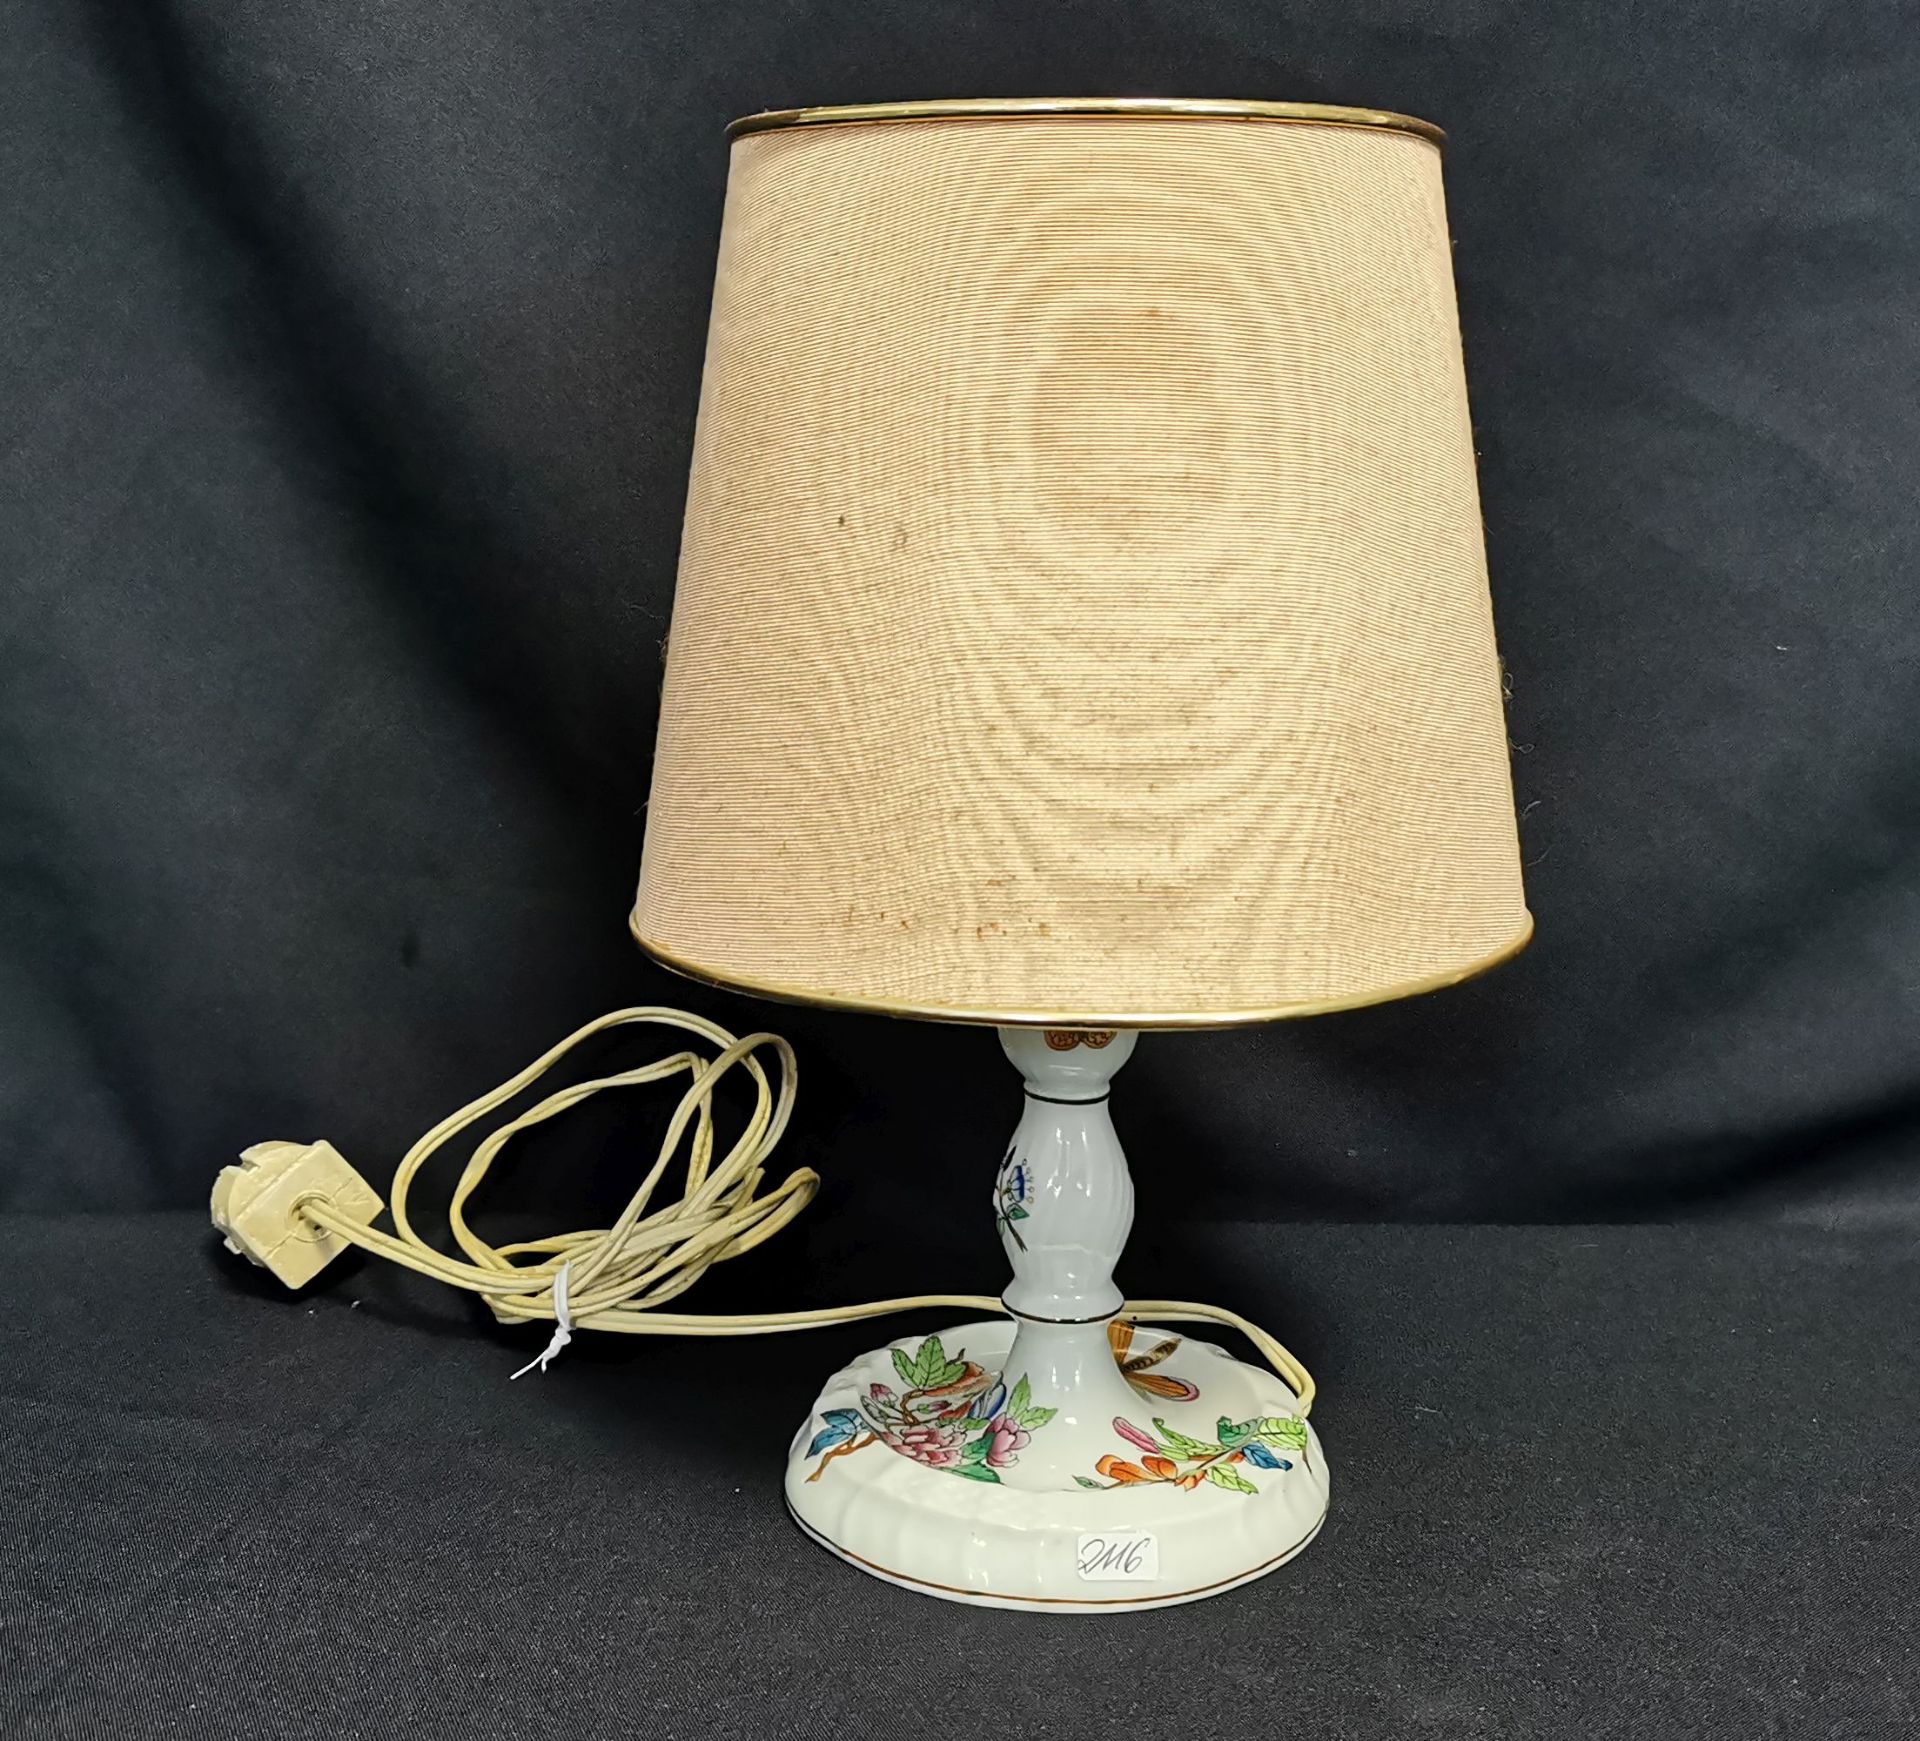 HEREND TABLE LAMP